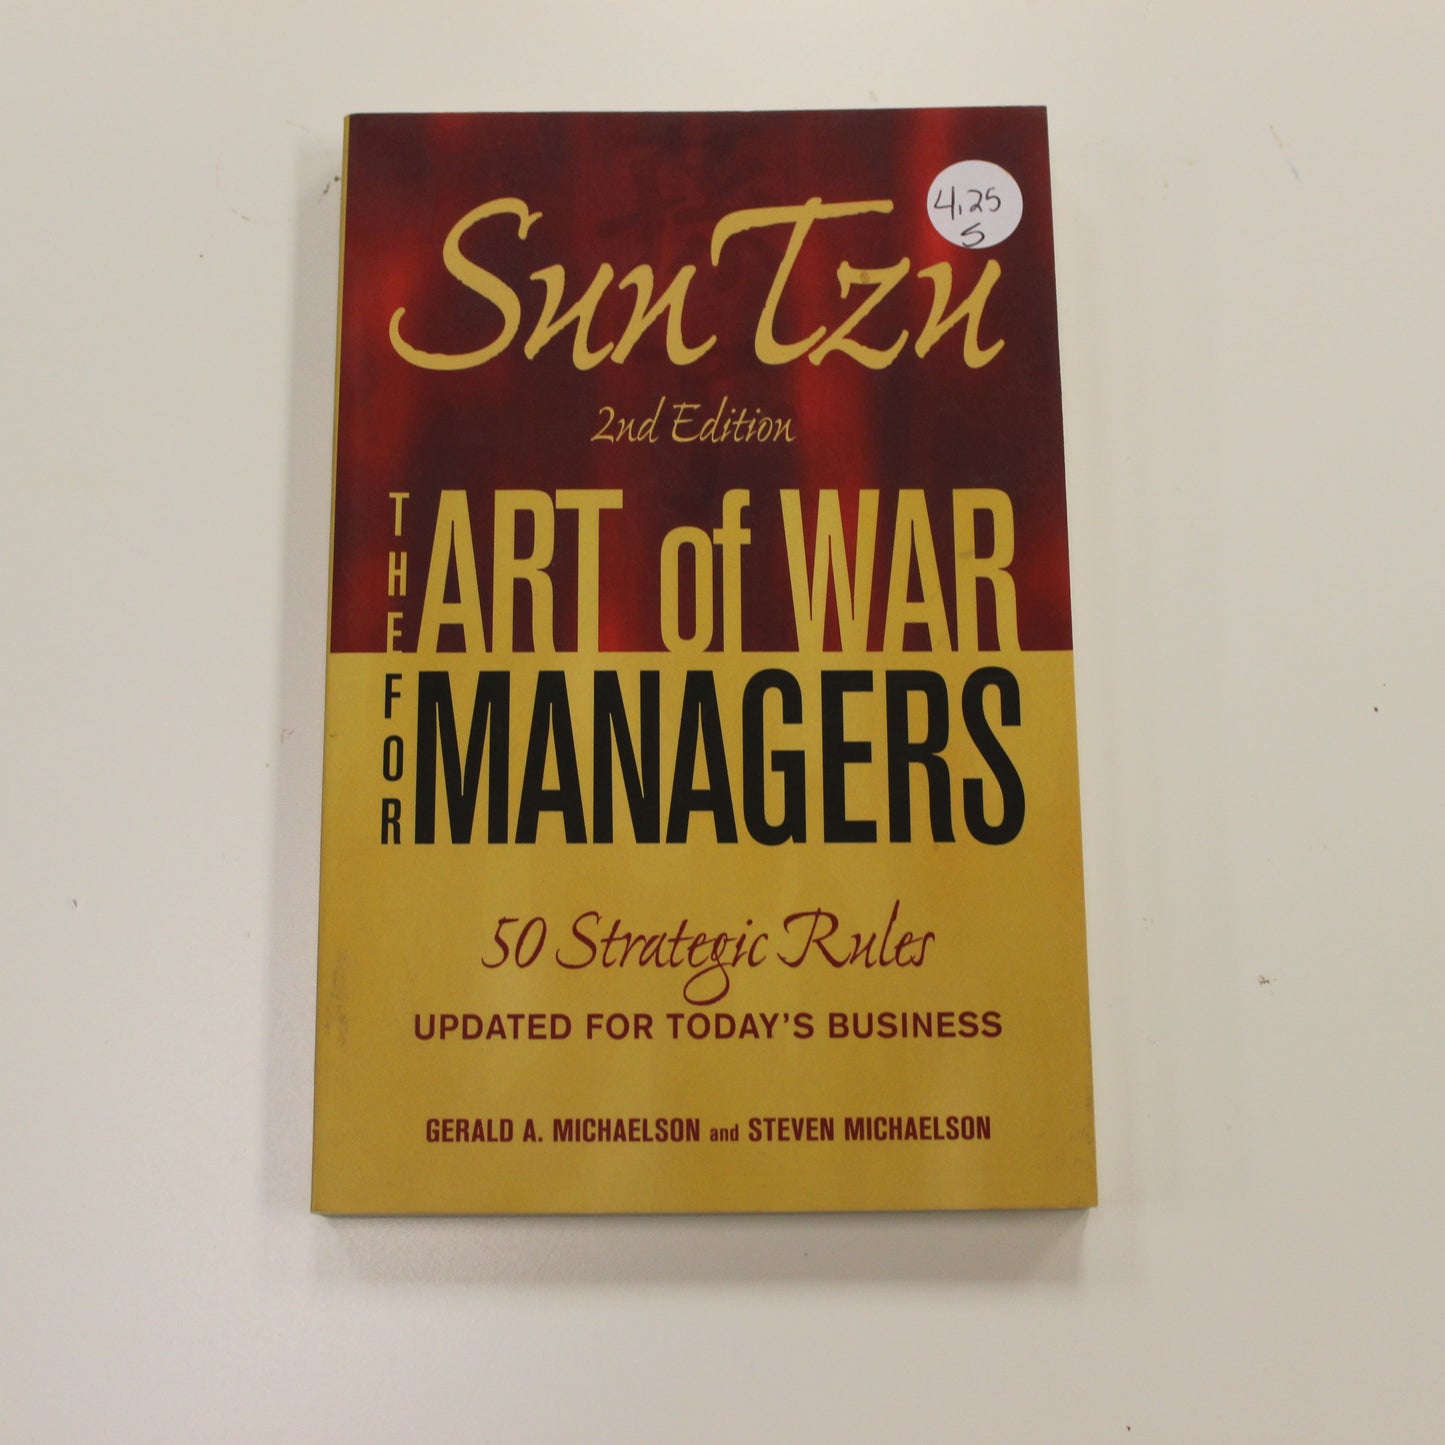 THE ART OF WAR FOR MANAGERS